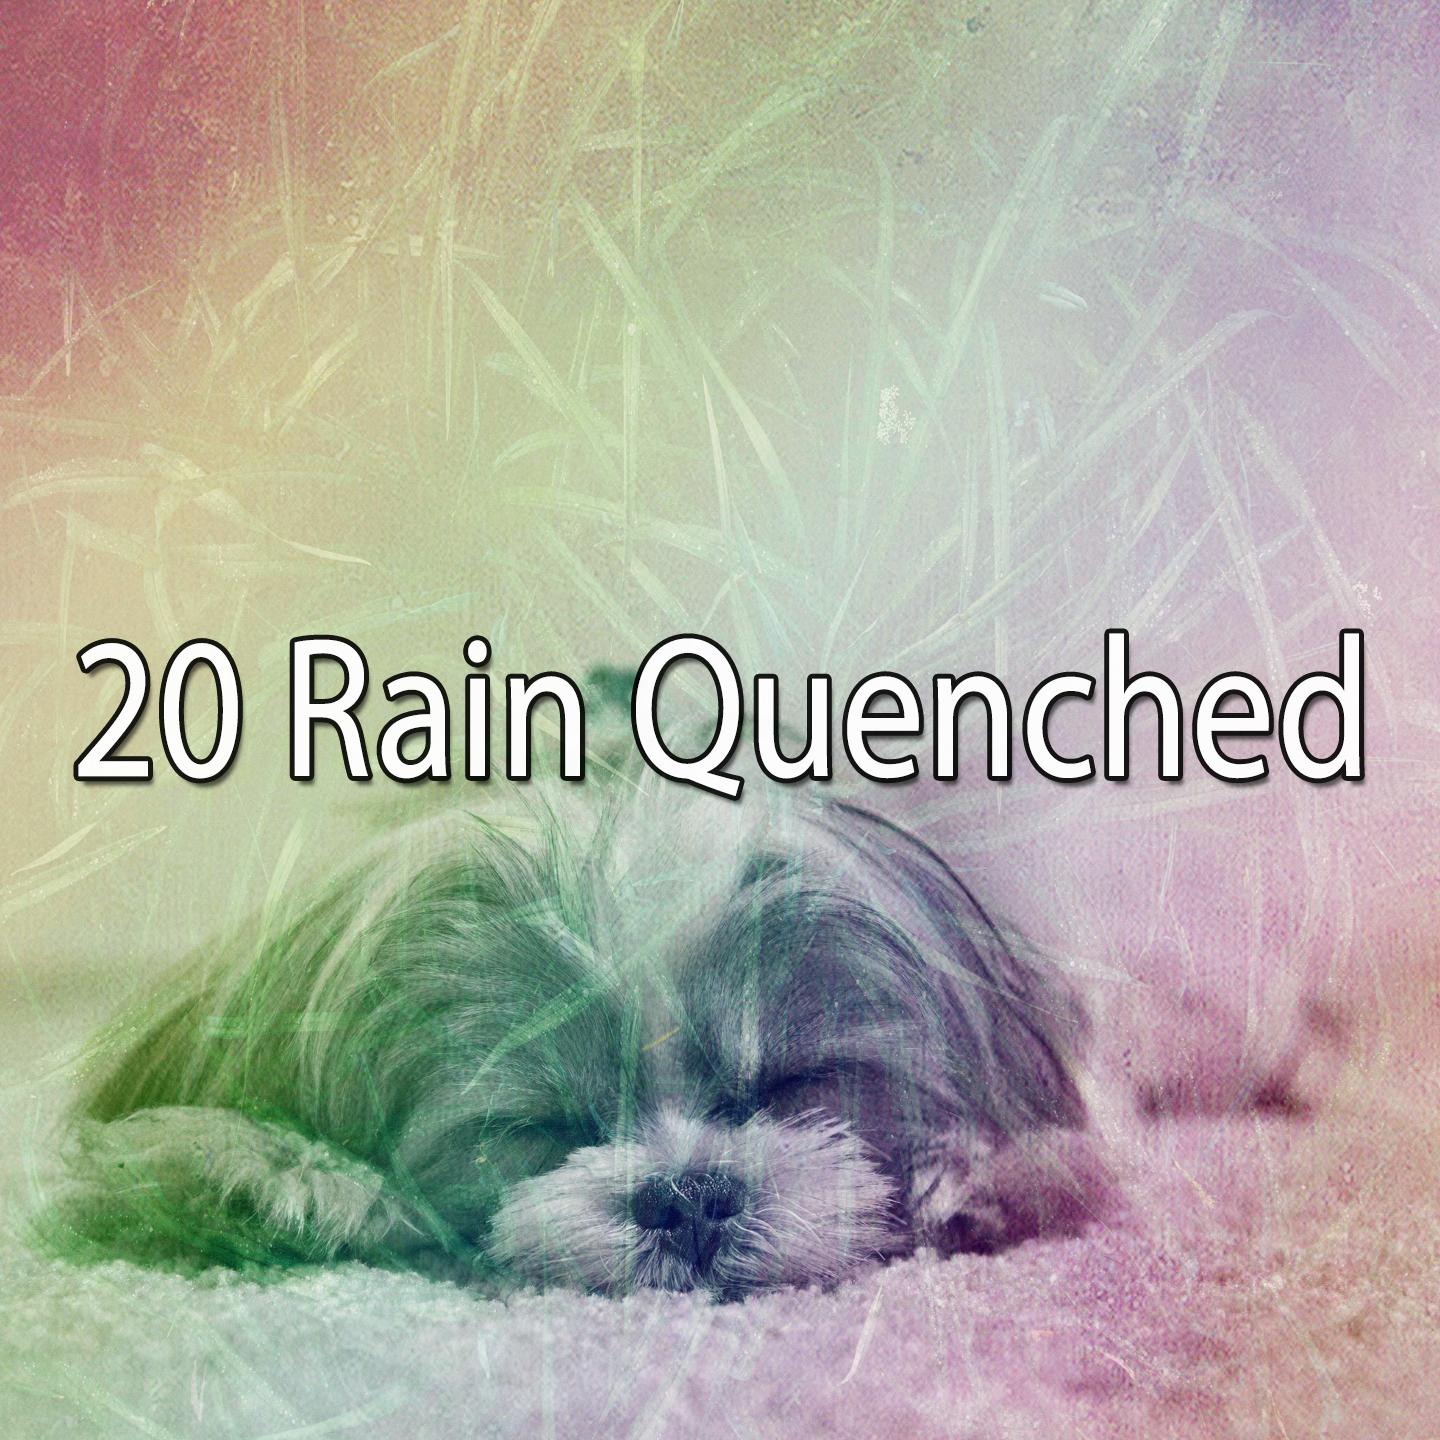 20 Rain Quenched